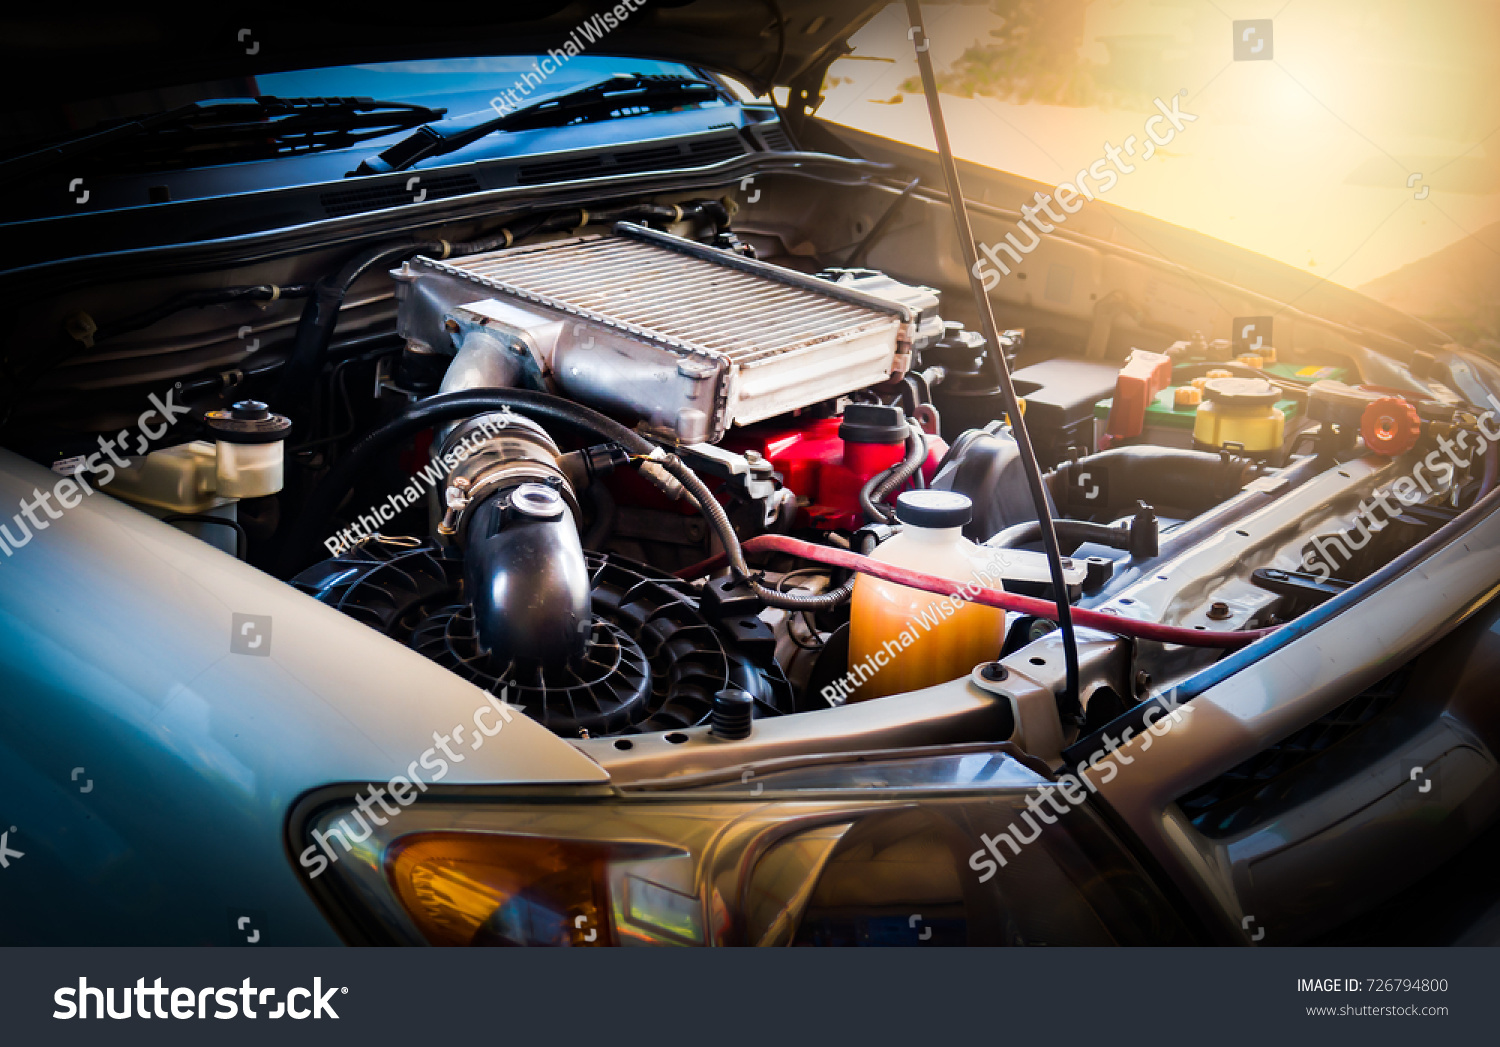 Car crash open hood car mechanic to check condition of damage. See the radiator cooling panel Engine and electronic system for mechanic to check damage thoroughly to repair engine to complete for use. #726794800